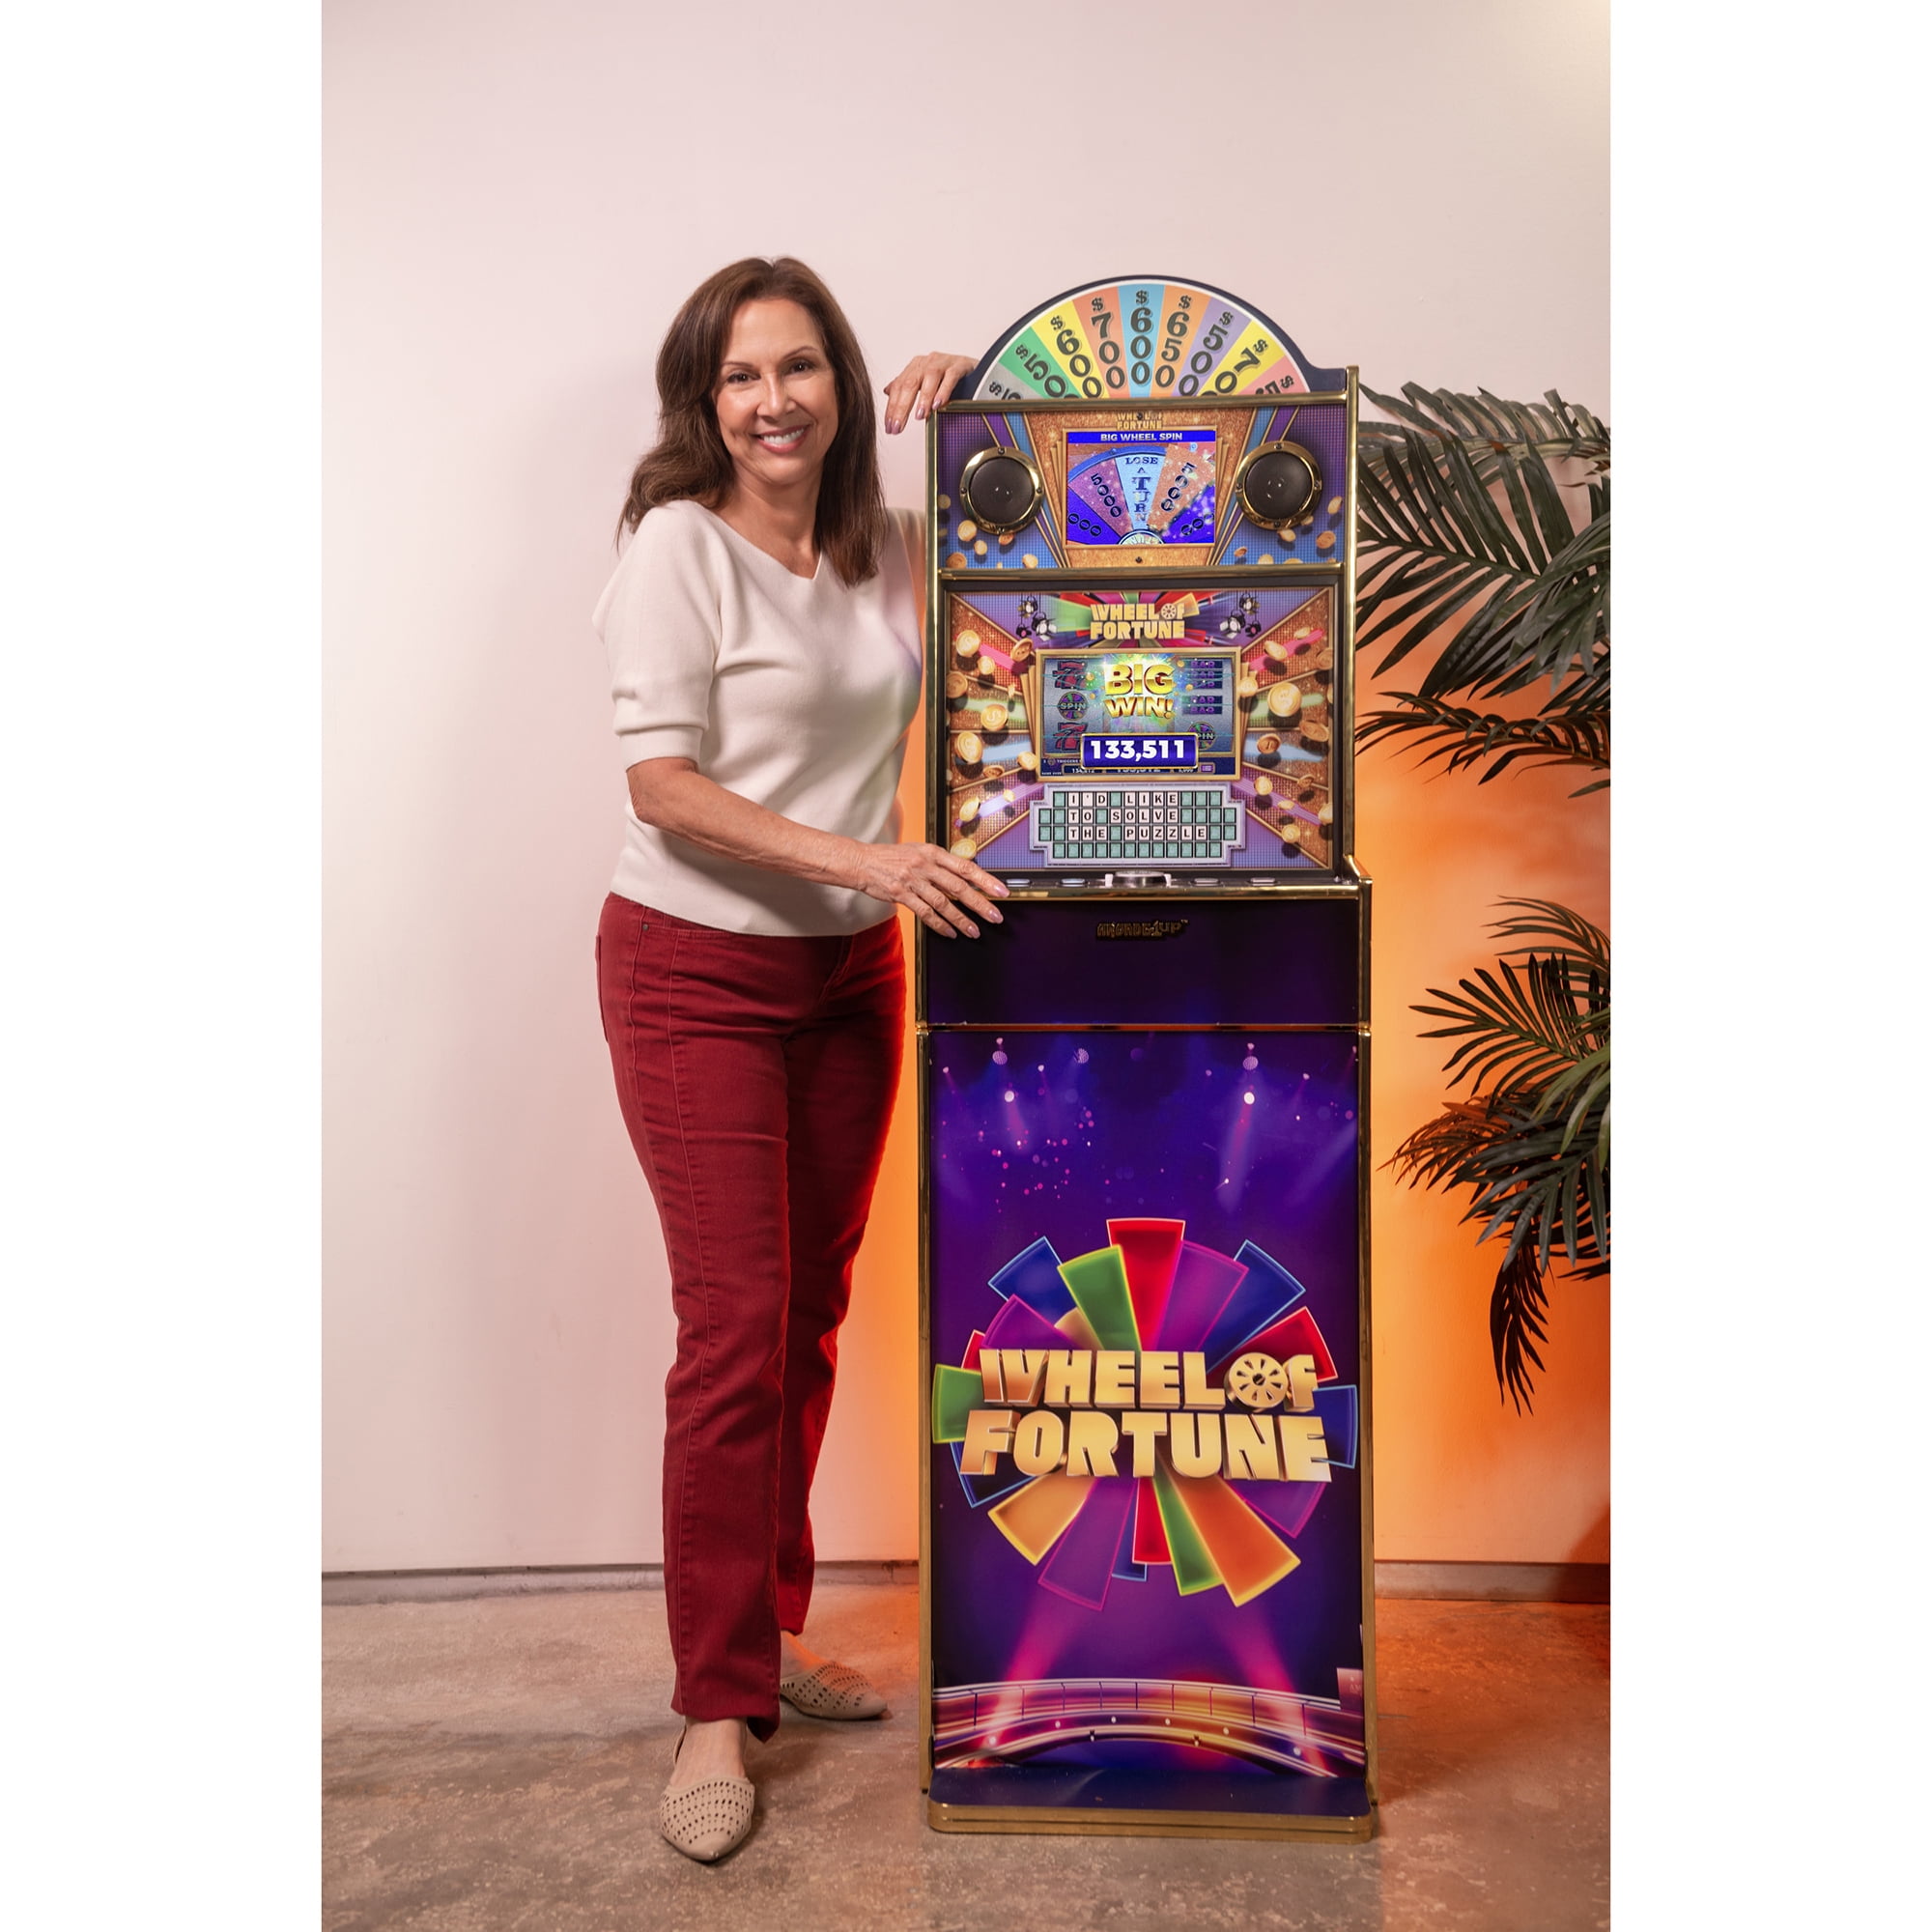 Arcade1Up Wheel of Fortune Casinocade Deluxe, built for your home